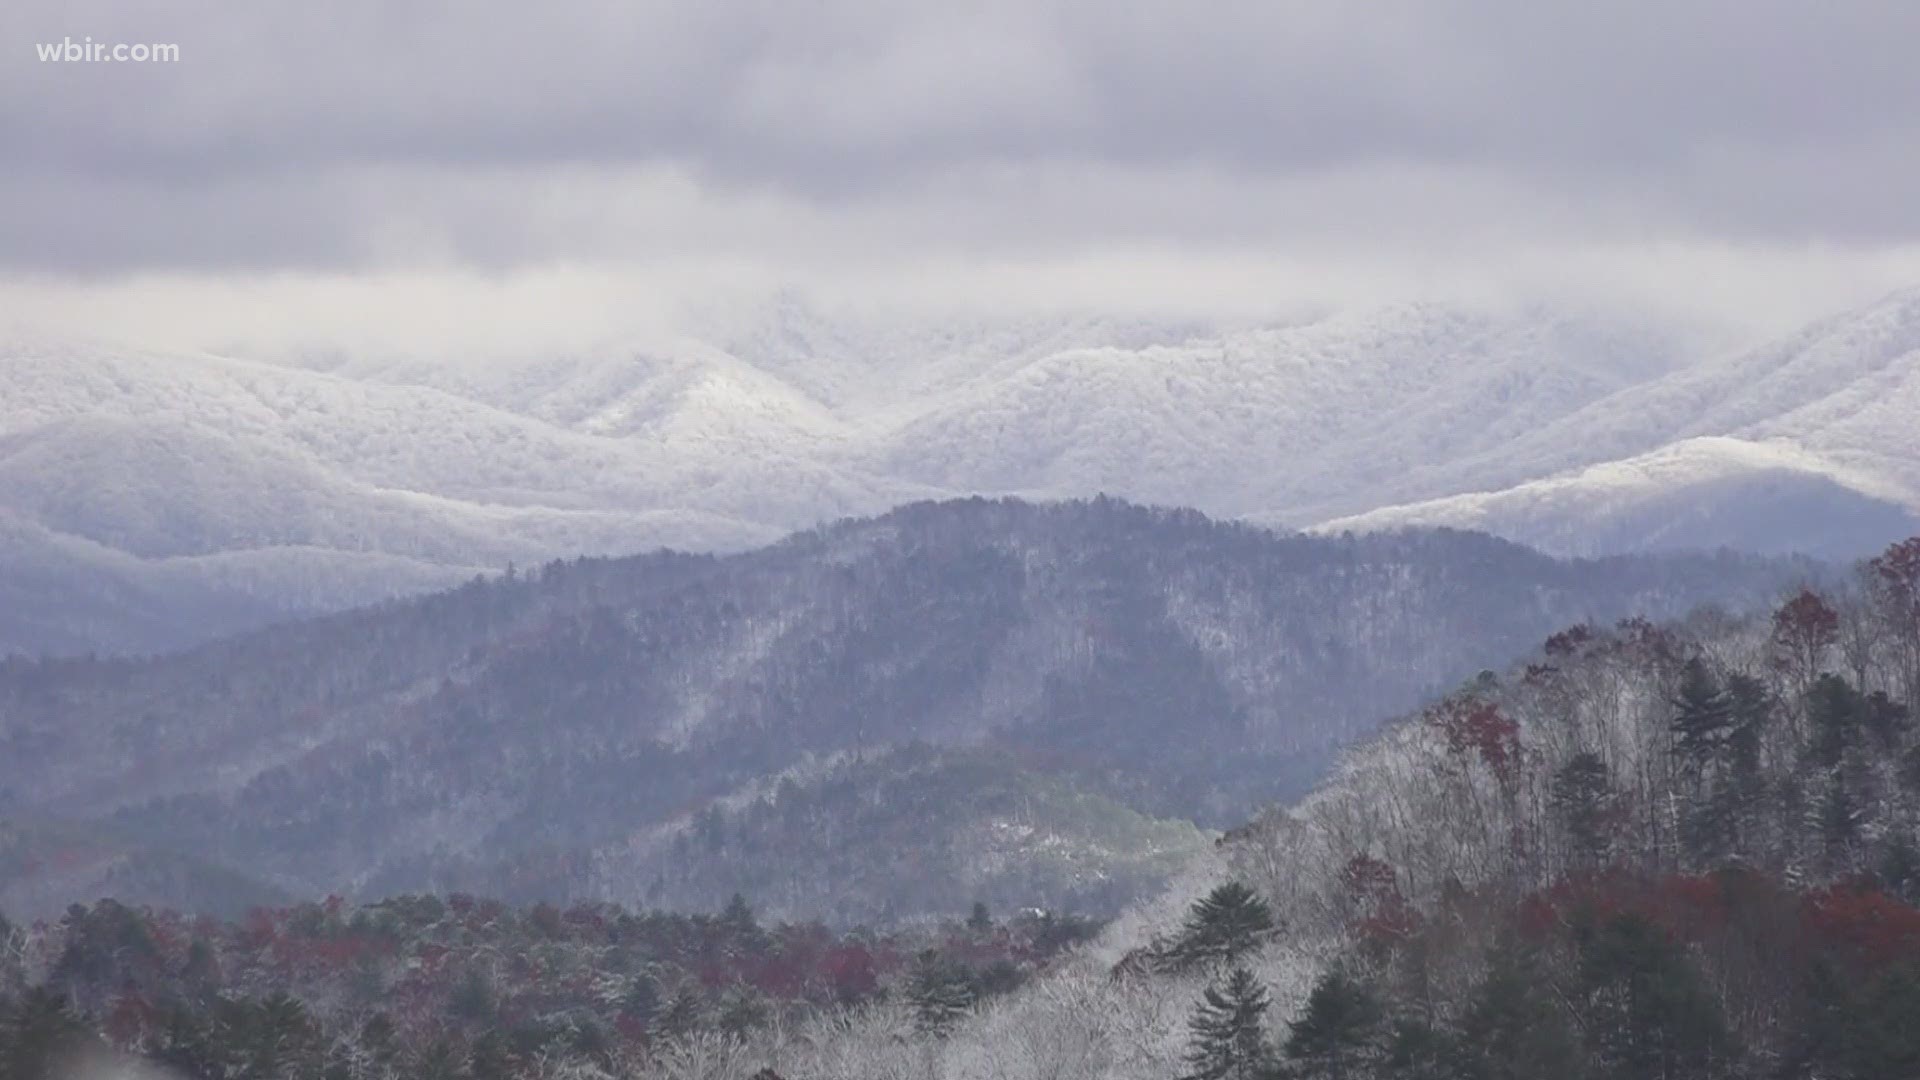 Snow creates pictureque scene in Great Smoky Mountains